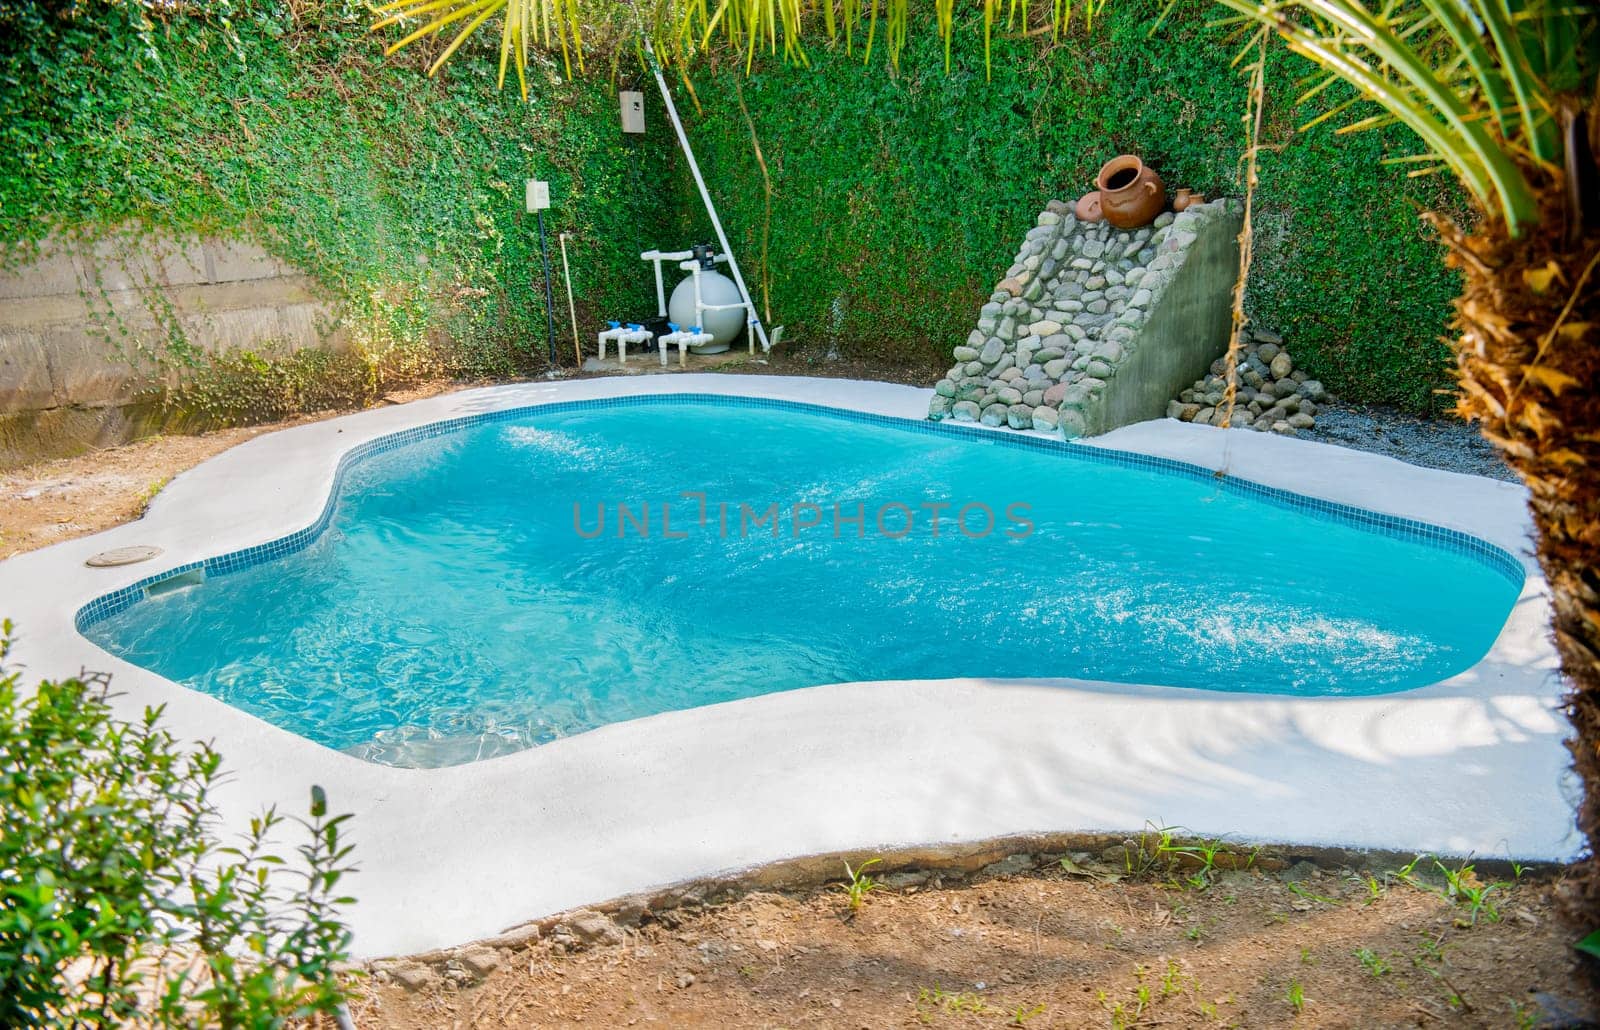 Homemade swimming pool in a garden. Swimming pool designs for the home. Crystal water home pool surrounded by a garden. Home swimming pool maintenance concept by isaiphoto